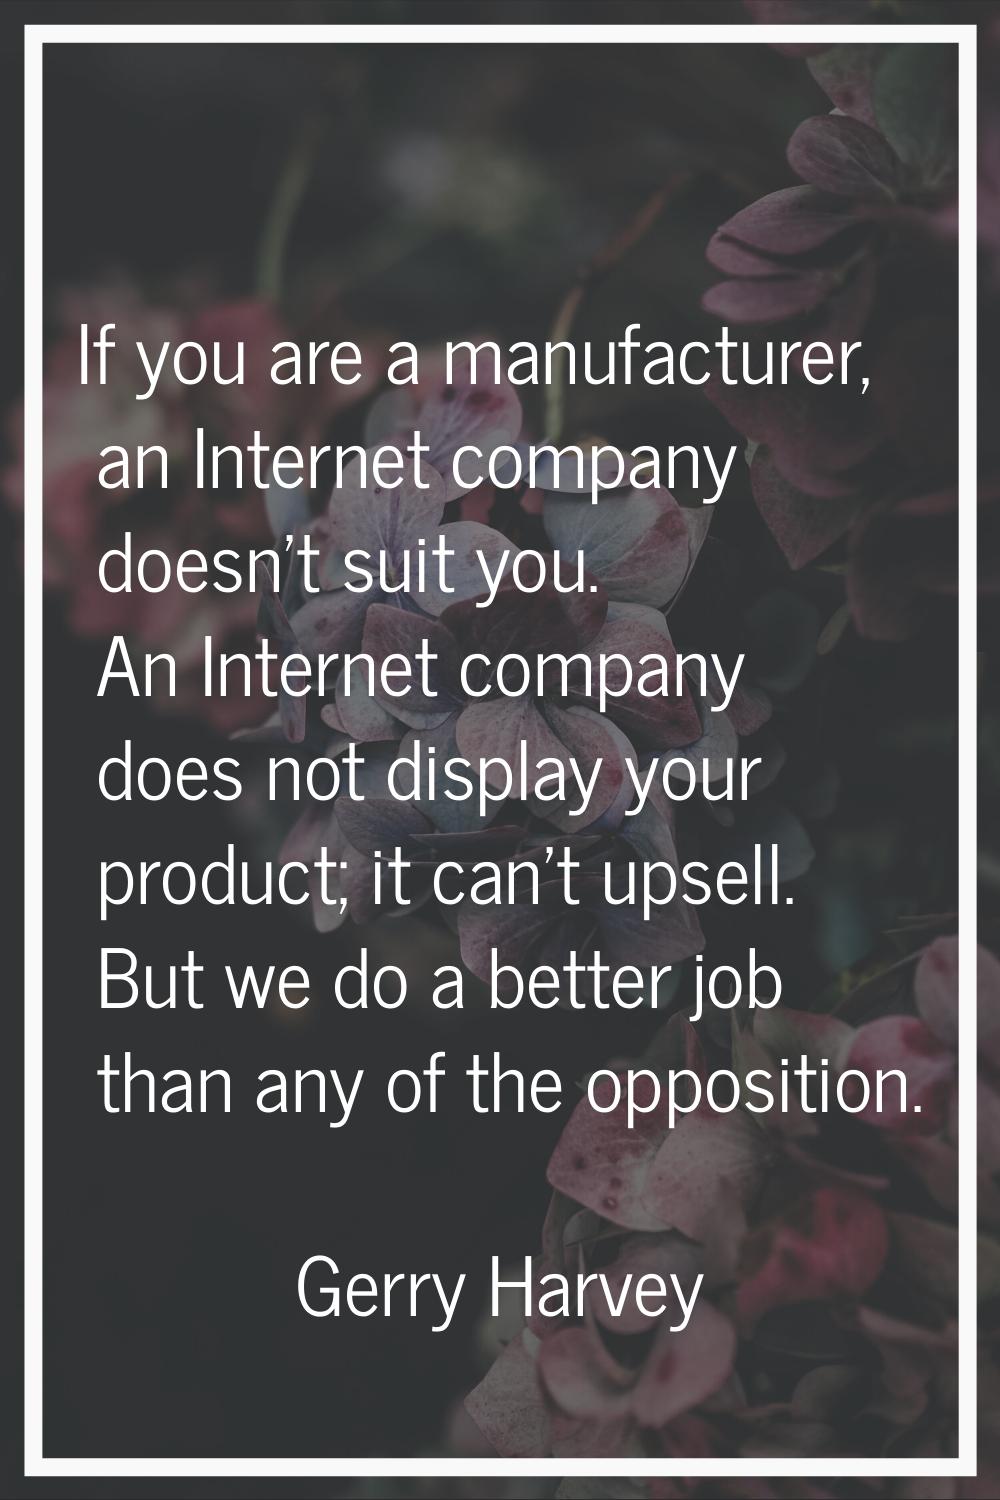 If you are a manufacturer, an Internet company doesn't suit you. An Internet company does not displ